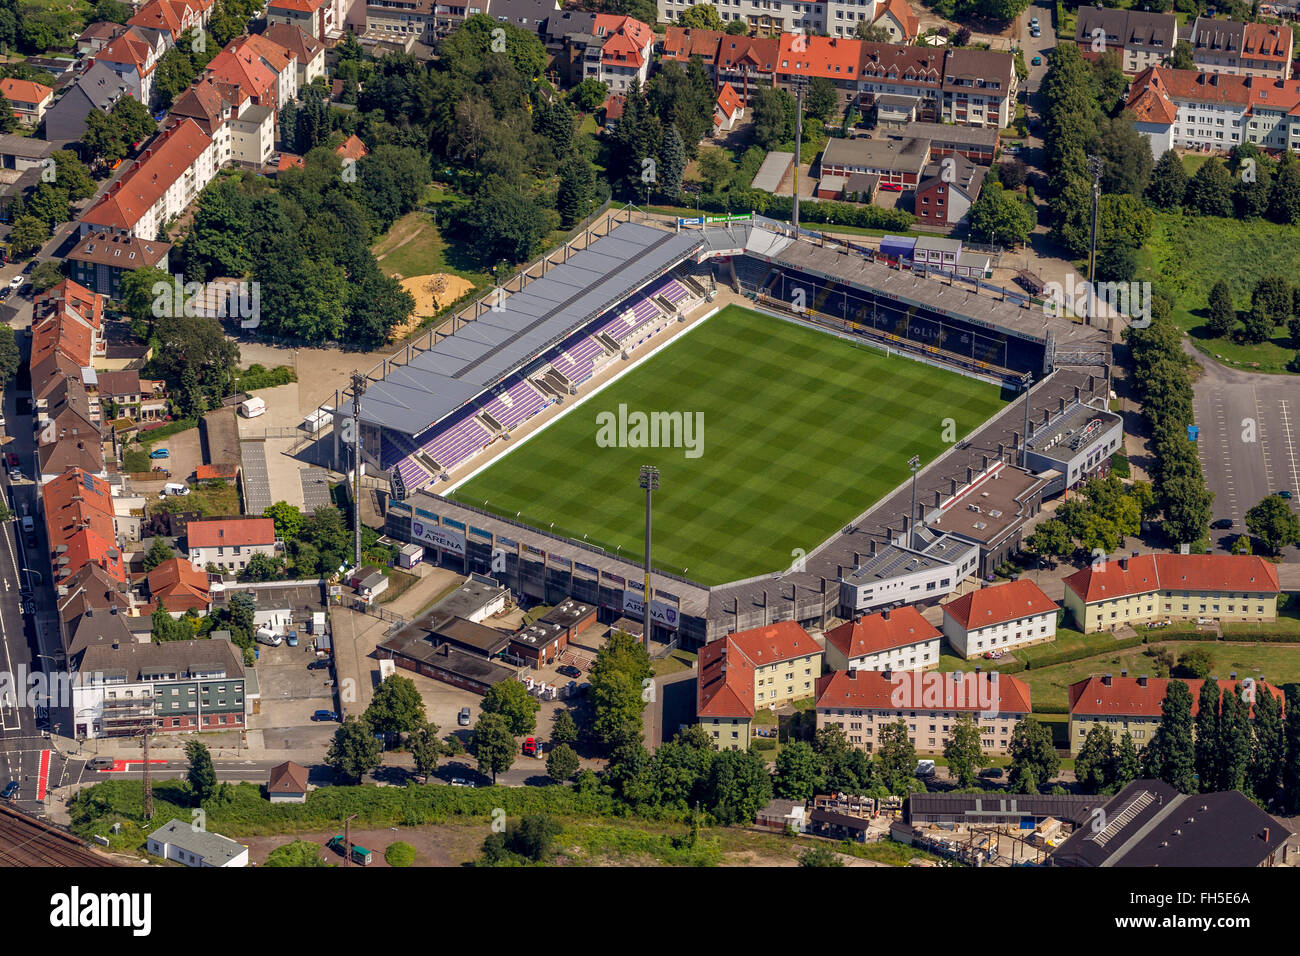 Aerial view, osnatel ARENA Stadium at the Bremen Bridge, Vfl Osnabruck Osnabruck, Germany, Europe, Aerial view, birds-eyes view, Stock Photo